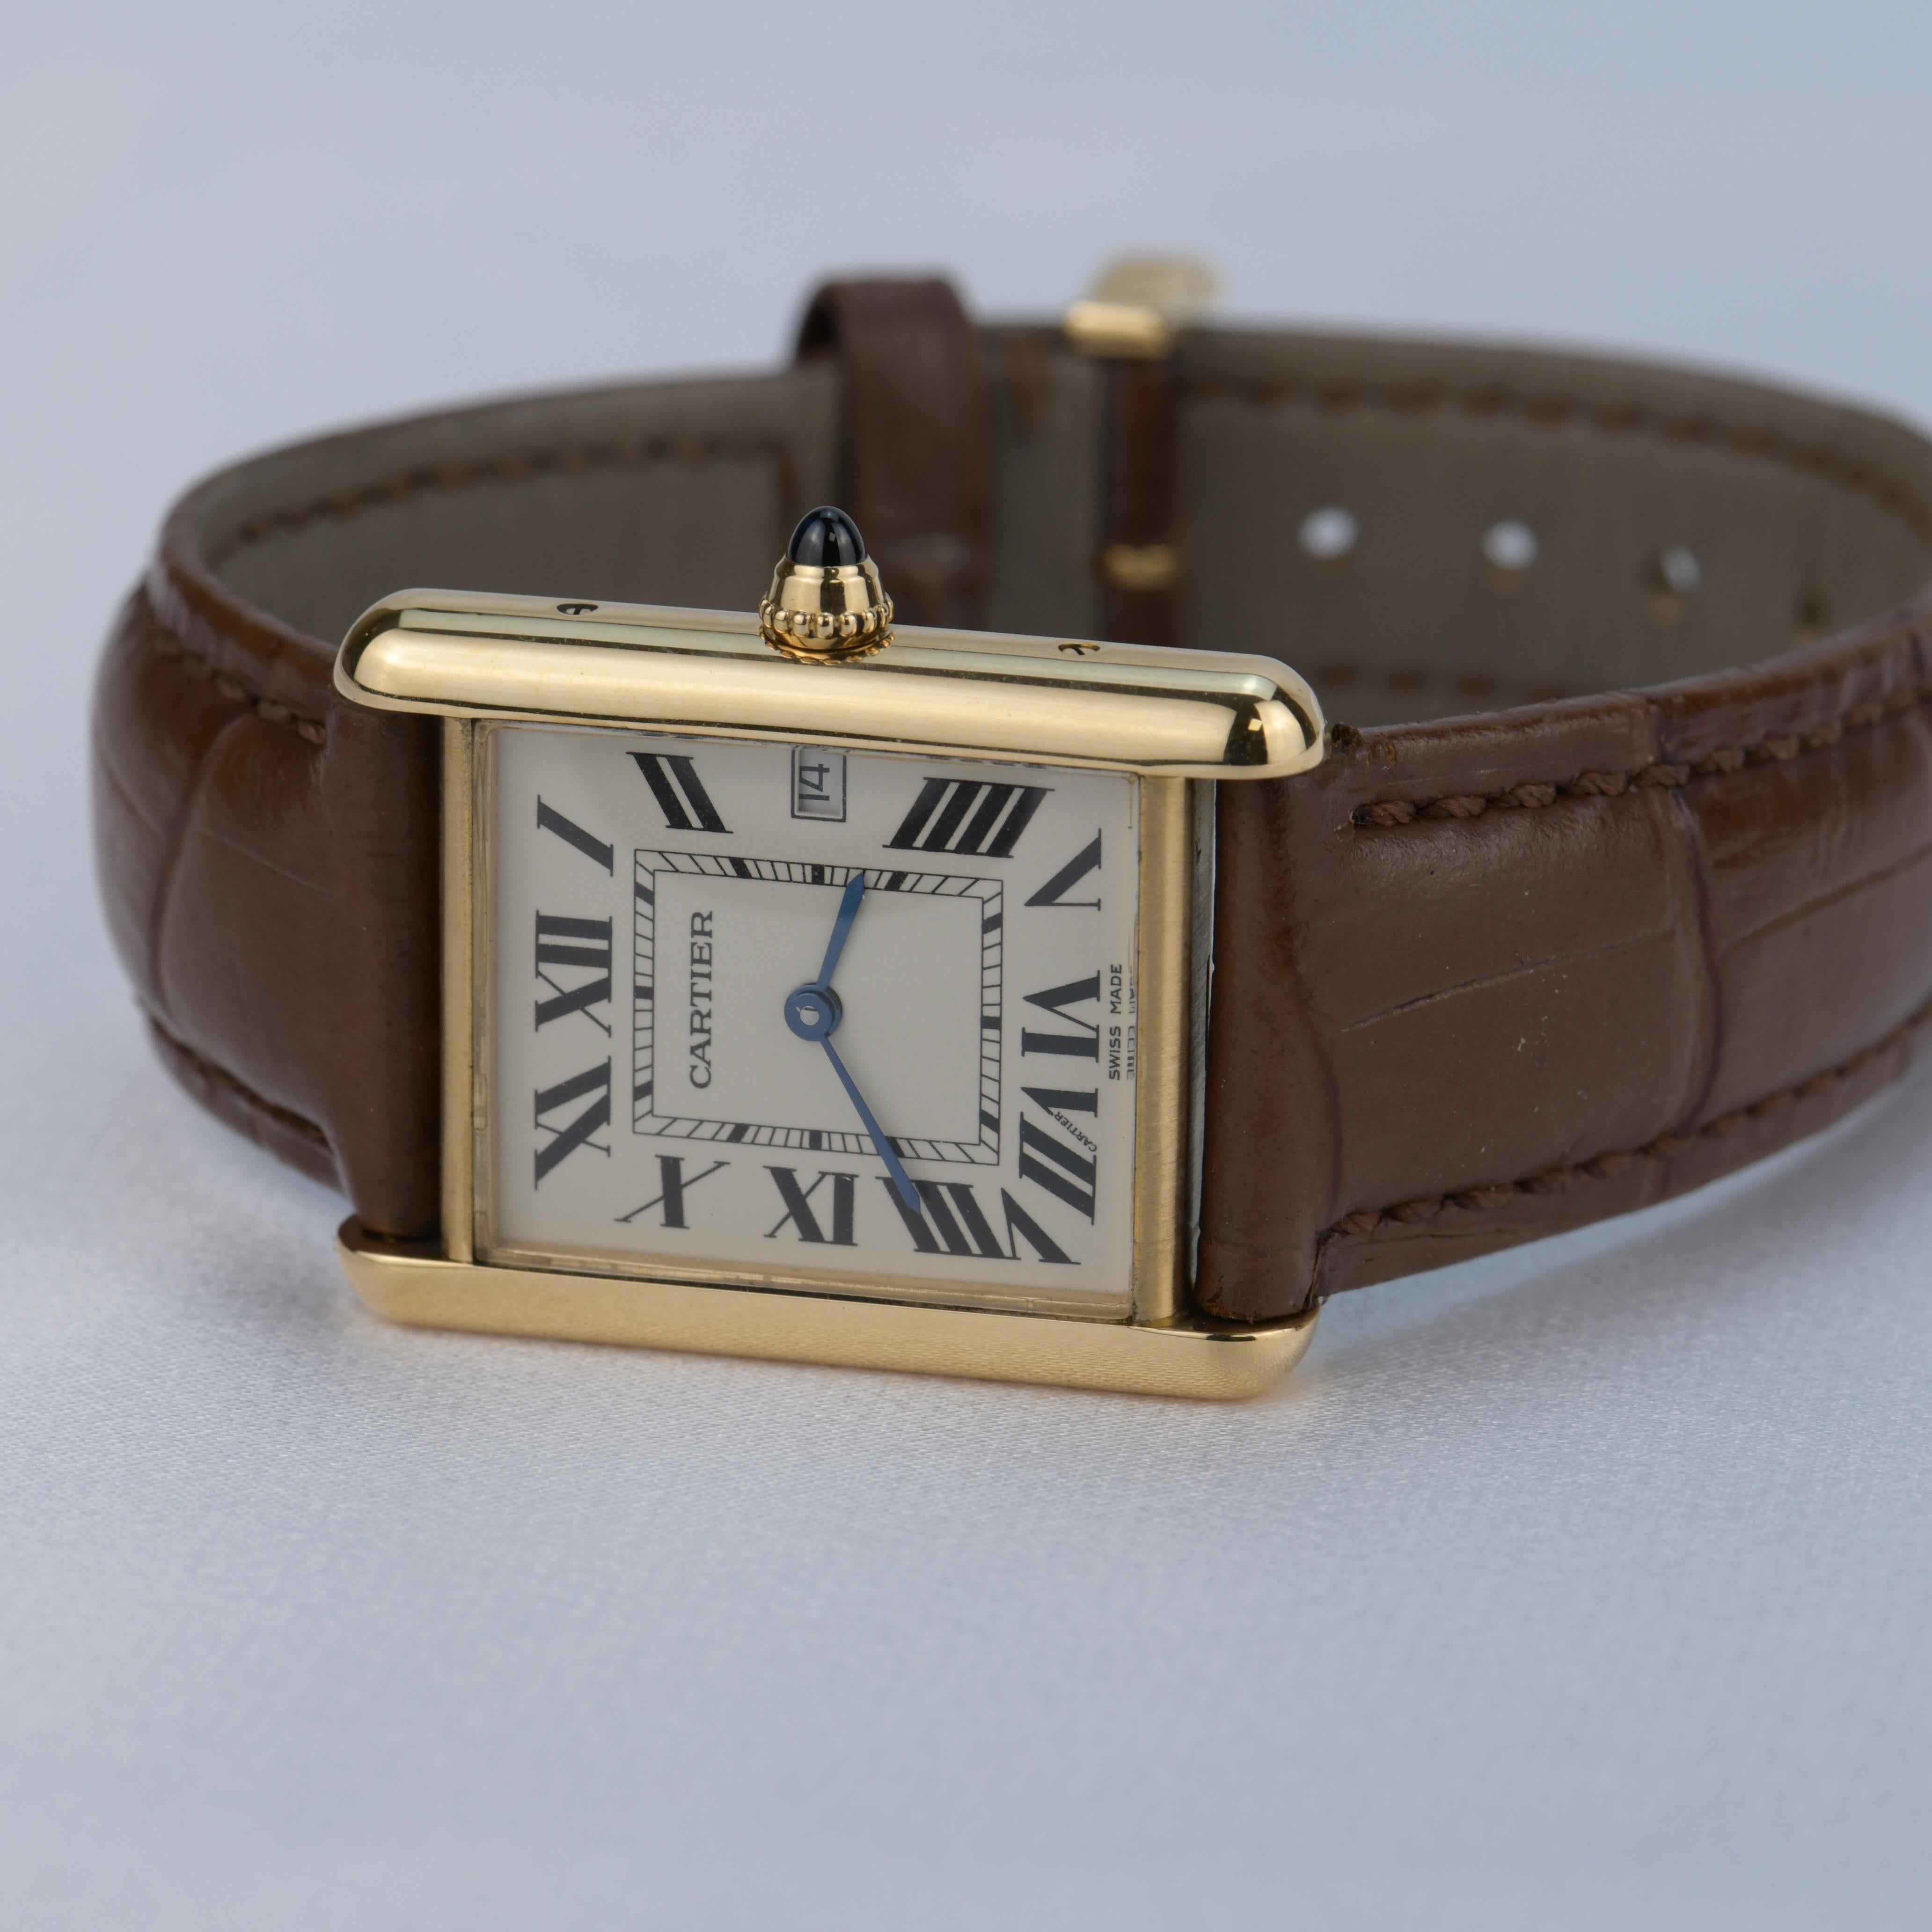 Dandelion Antiques Code	  AT-0714
Brand	                                  Cartier
Model No.	                          W1529856
Retail Price                                £9,000 / $12500
____________________________________

Date	                   